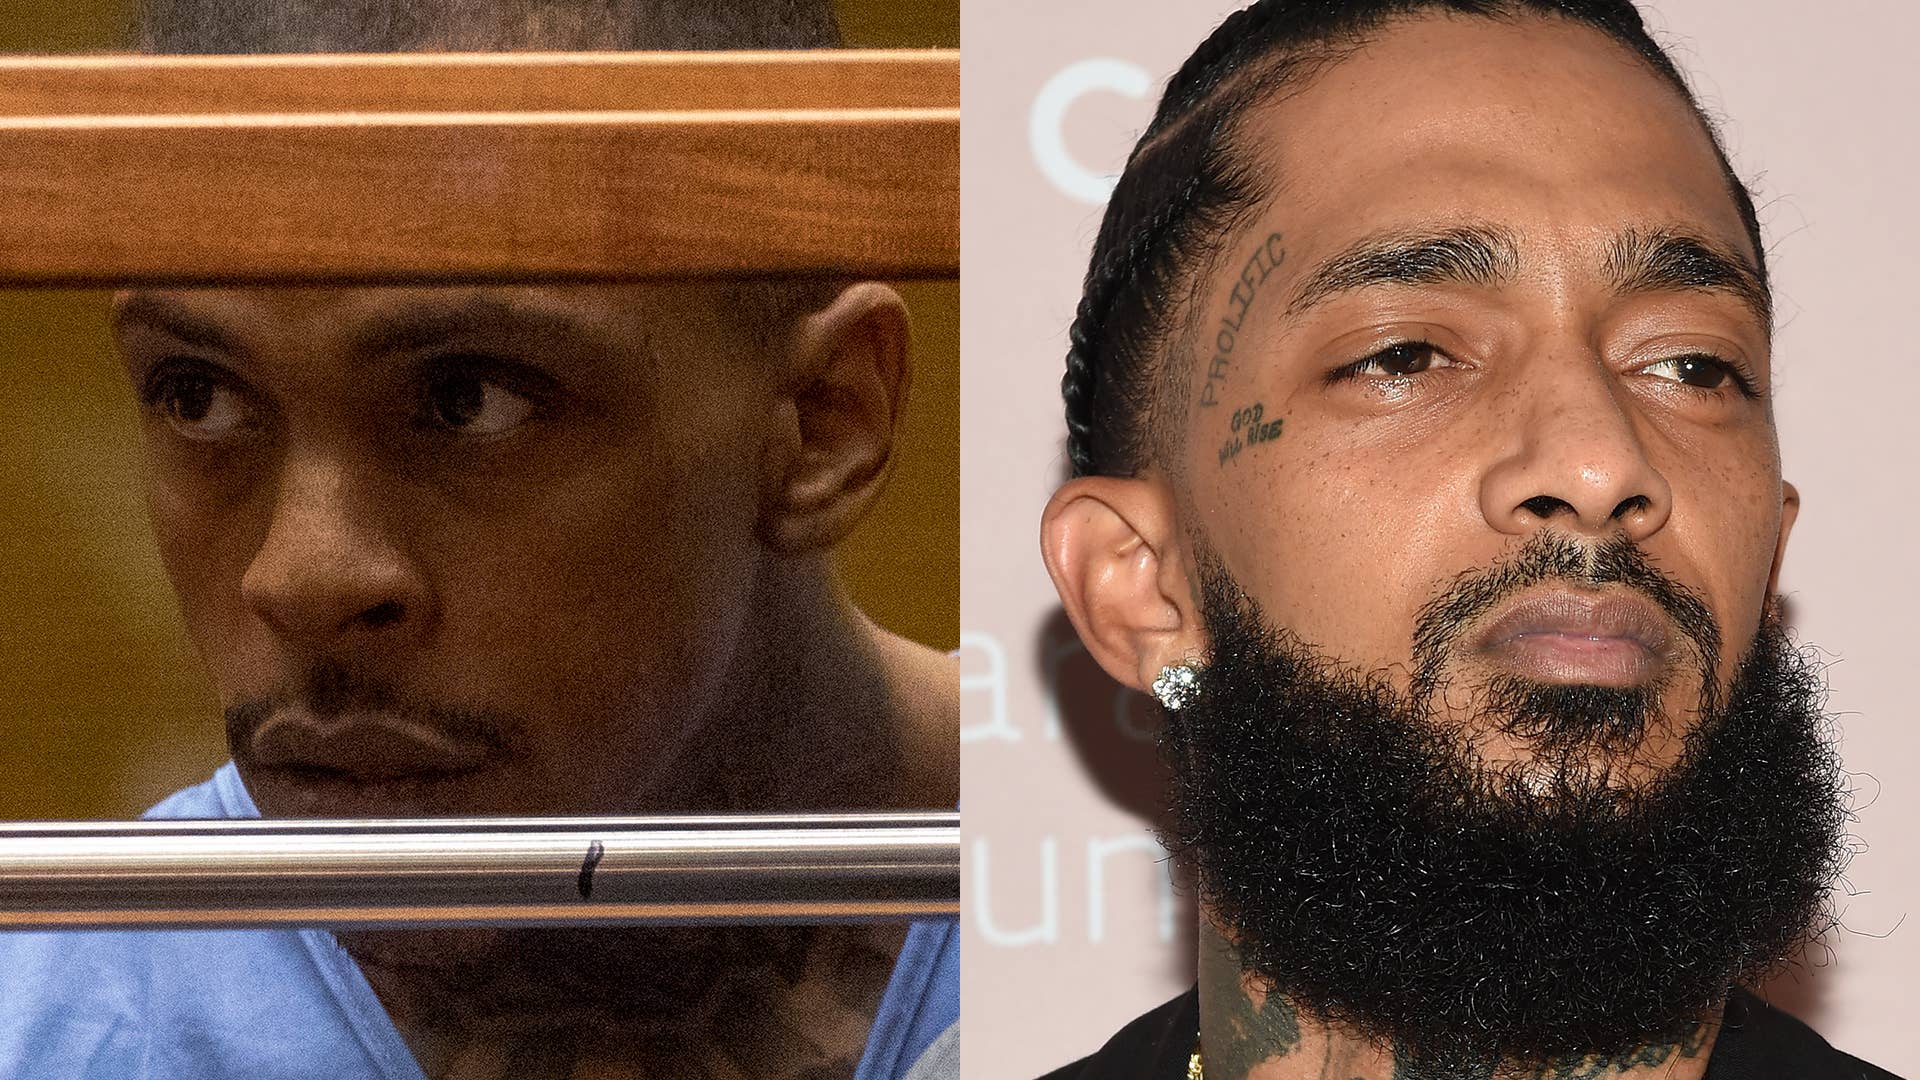 Eric Holder sits in court on trial for the murder of Nipsey Hussle, seen on the right